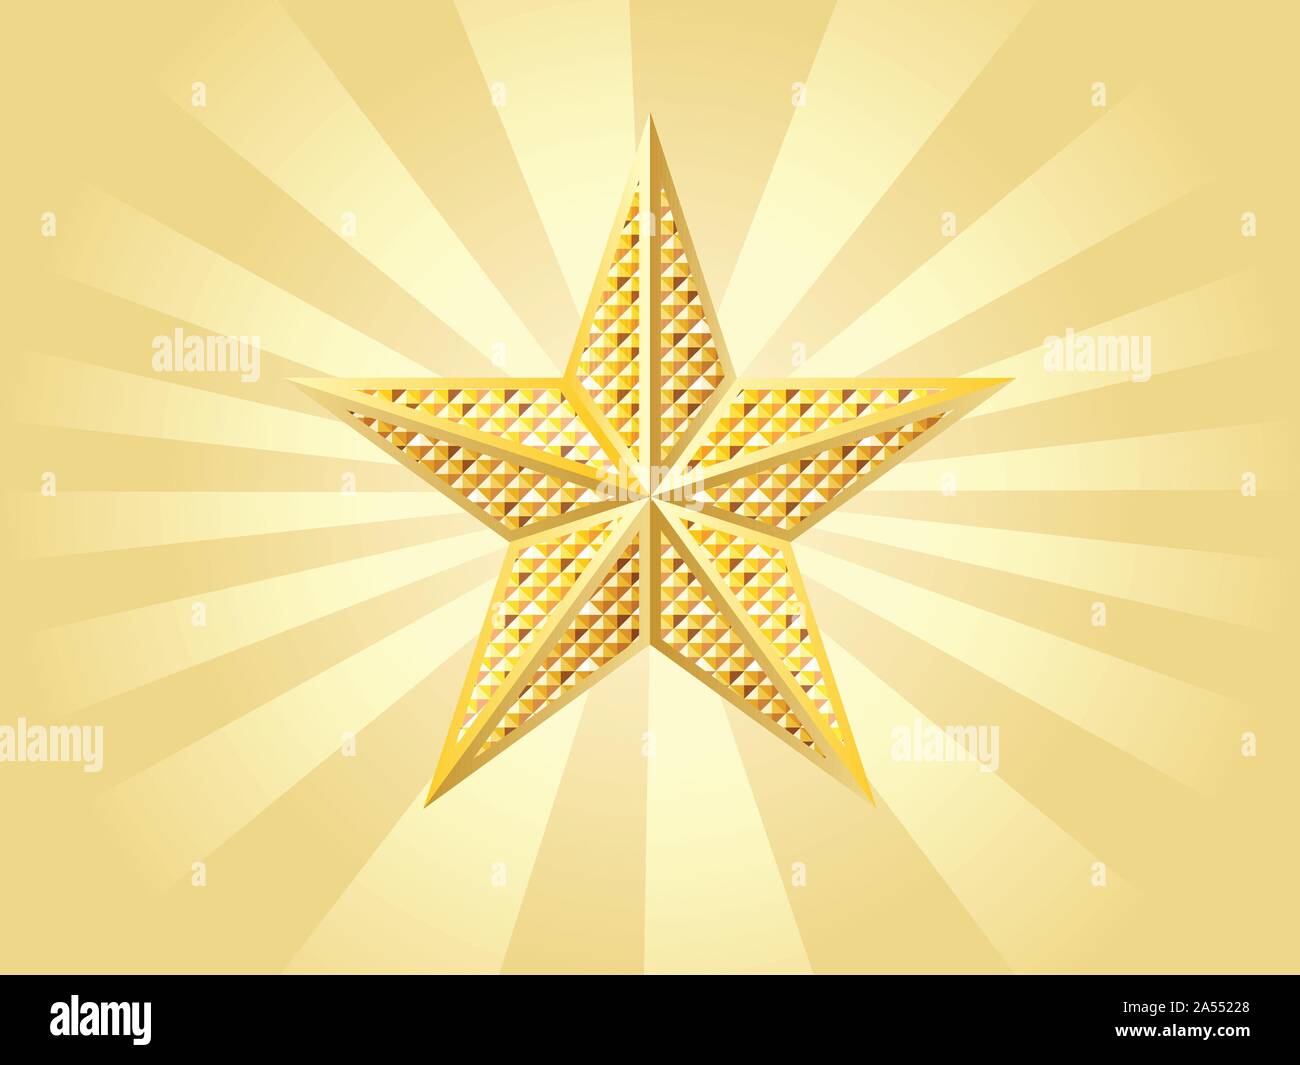 Shiny golden star on yellow background with rays. Stock Vector